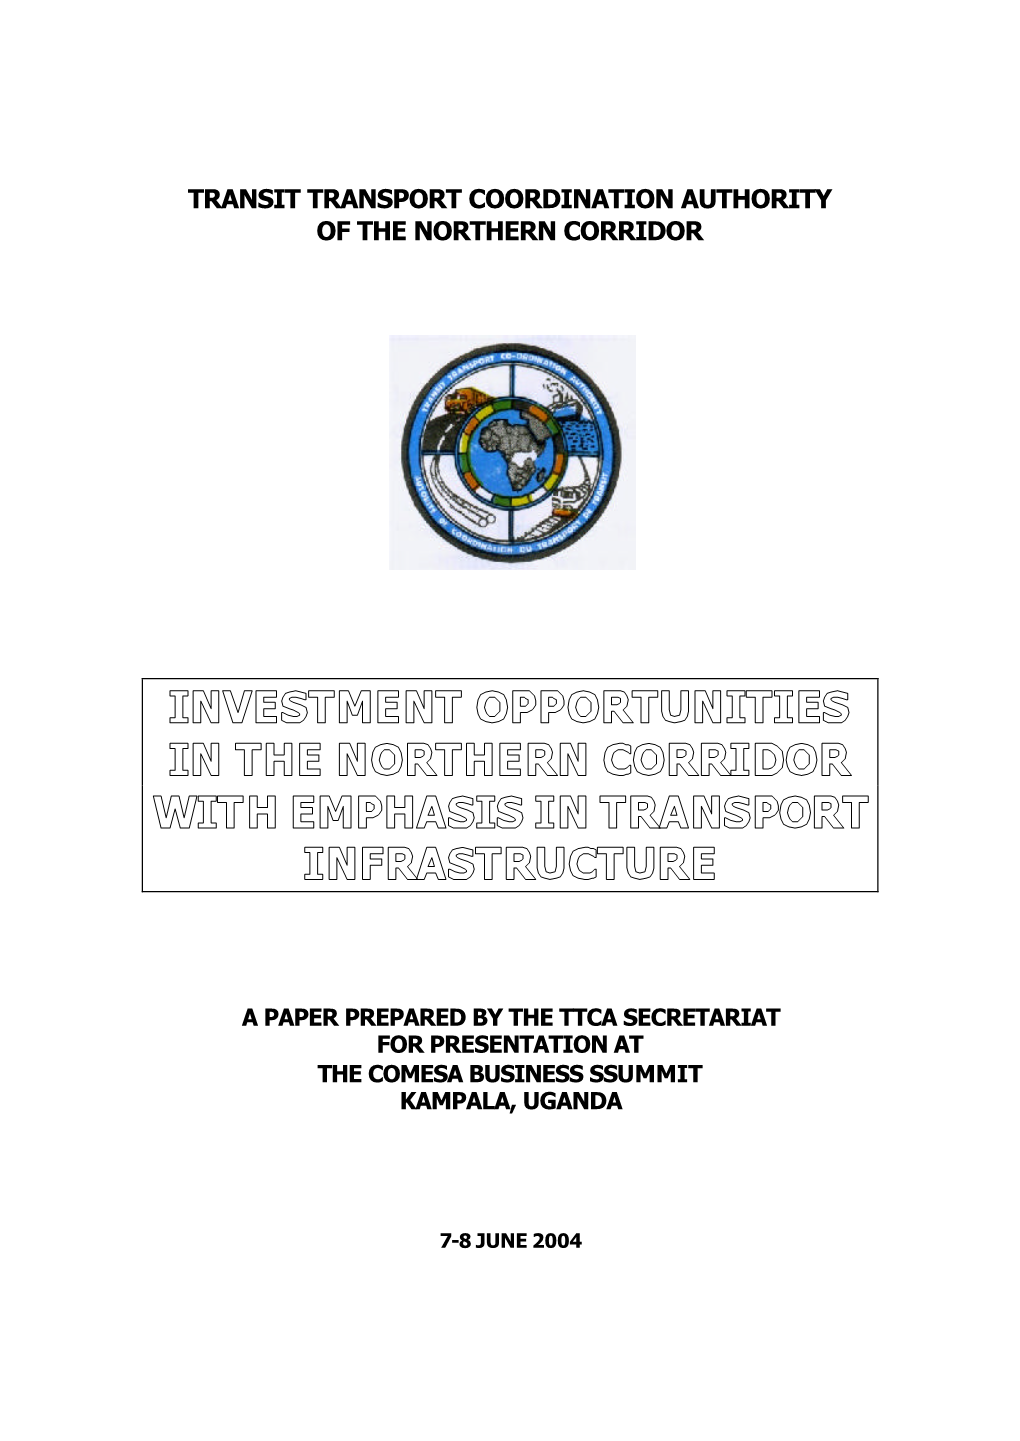 Transit Transport Coordination Authority of the Northern Corridor